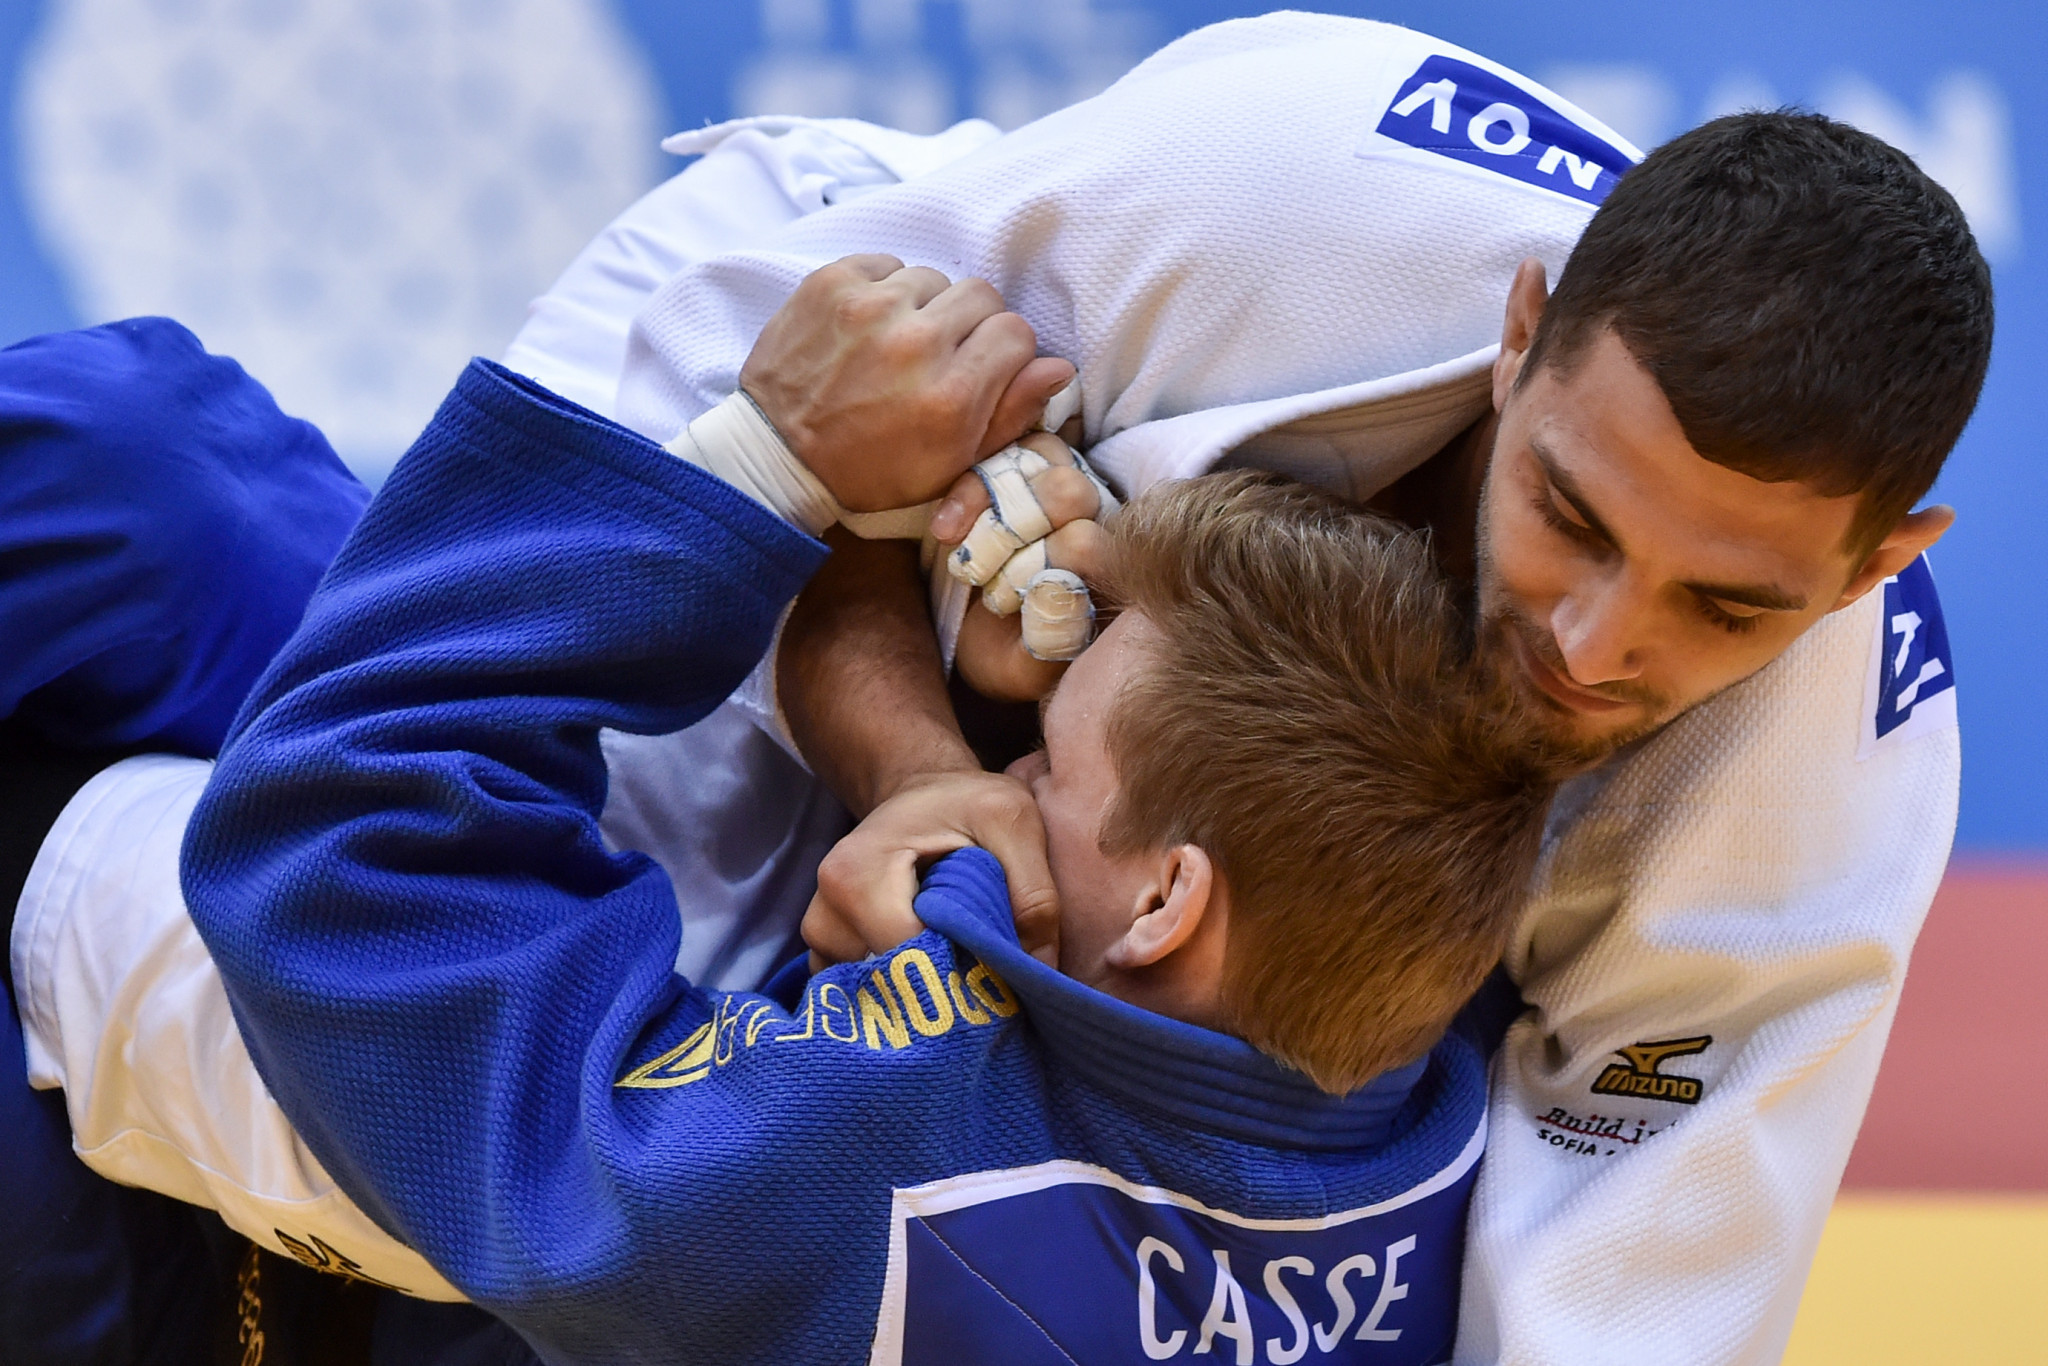 The second day of judo action also took place at Čyžoŭka-Arena ©Minsk 2019